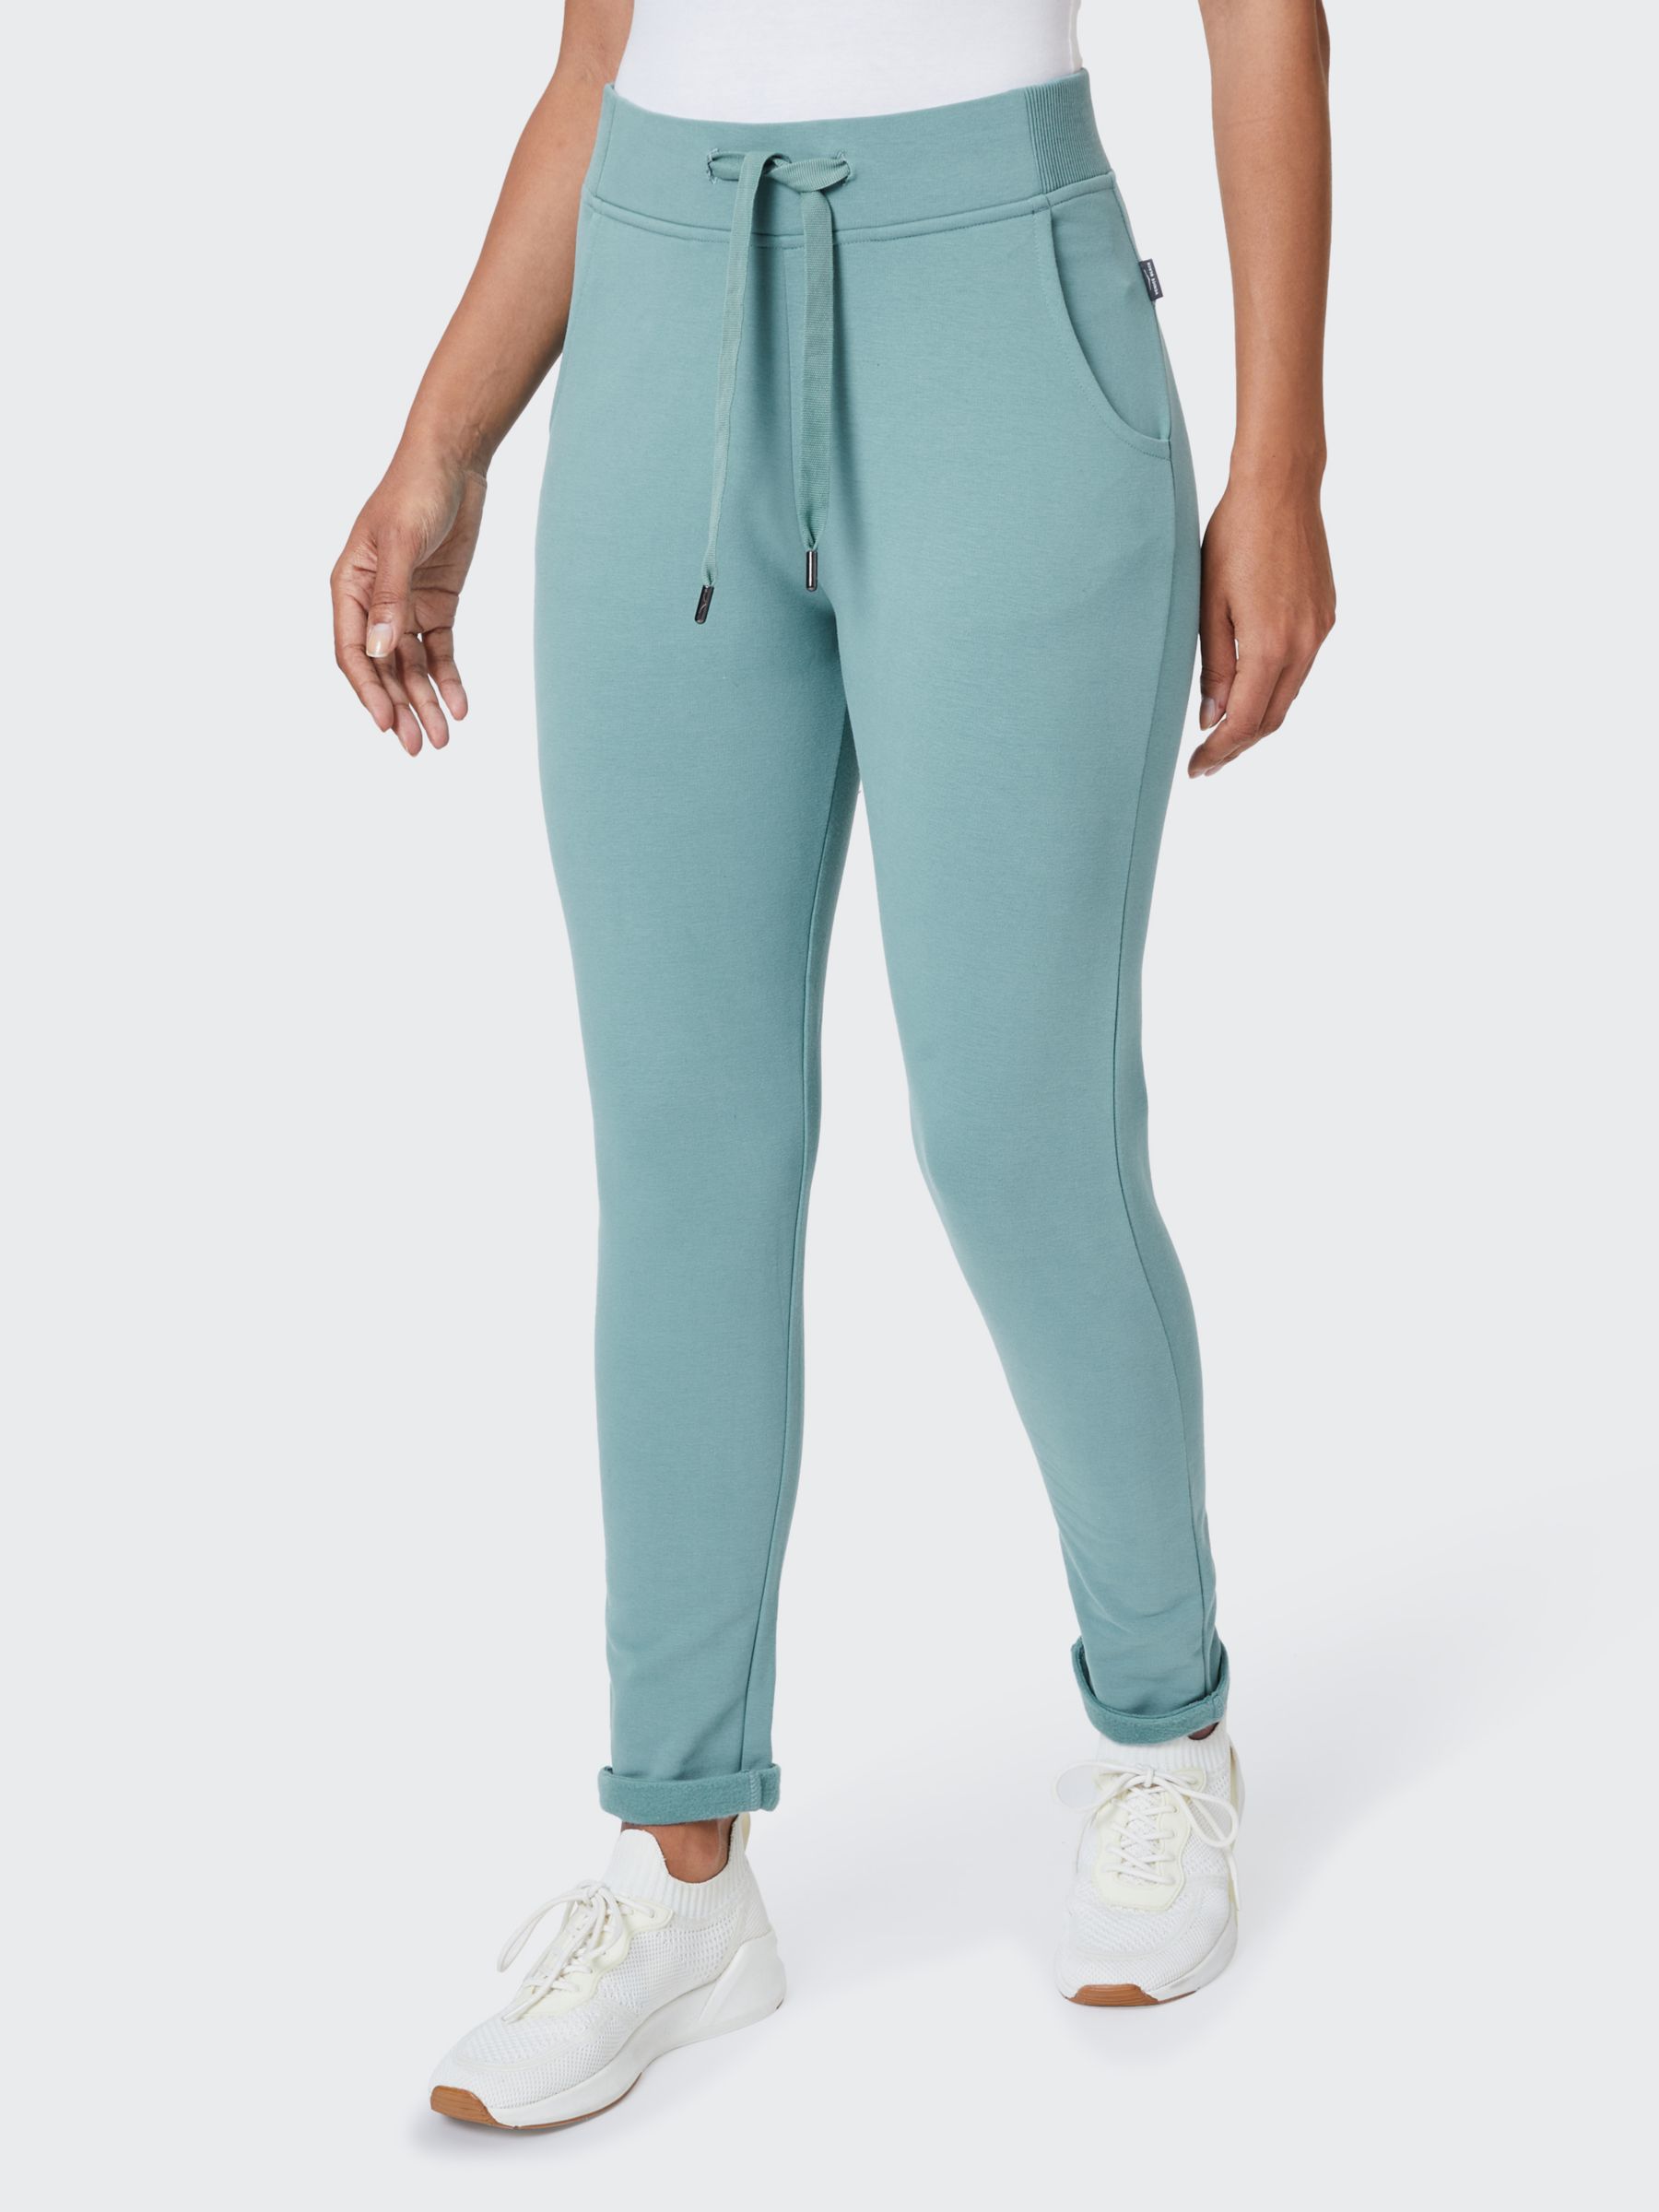 Venice Beach Sherly Cotton Blend Joggers, Agave at John Lewis & Partners